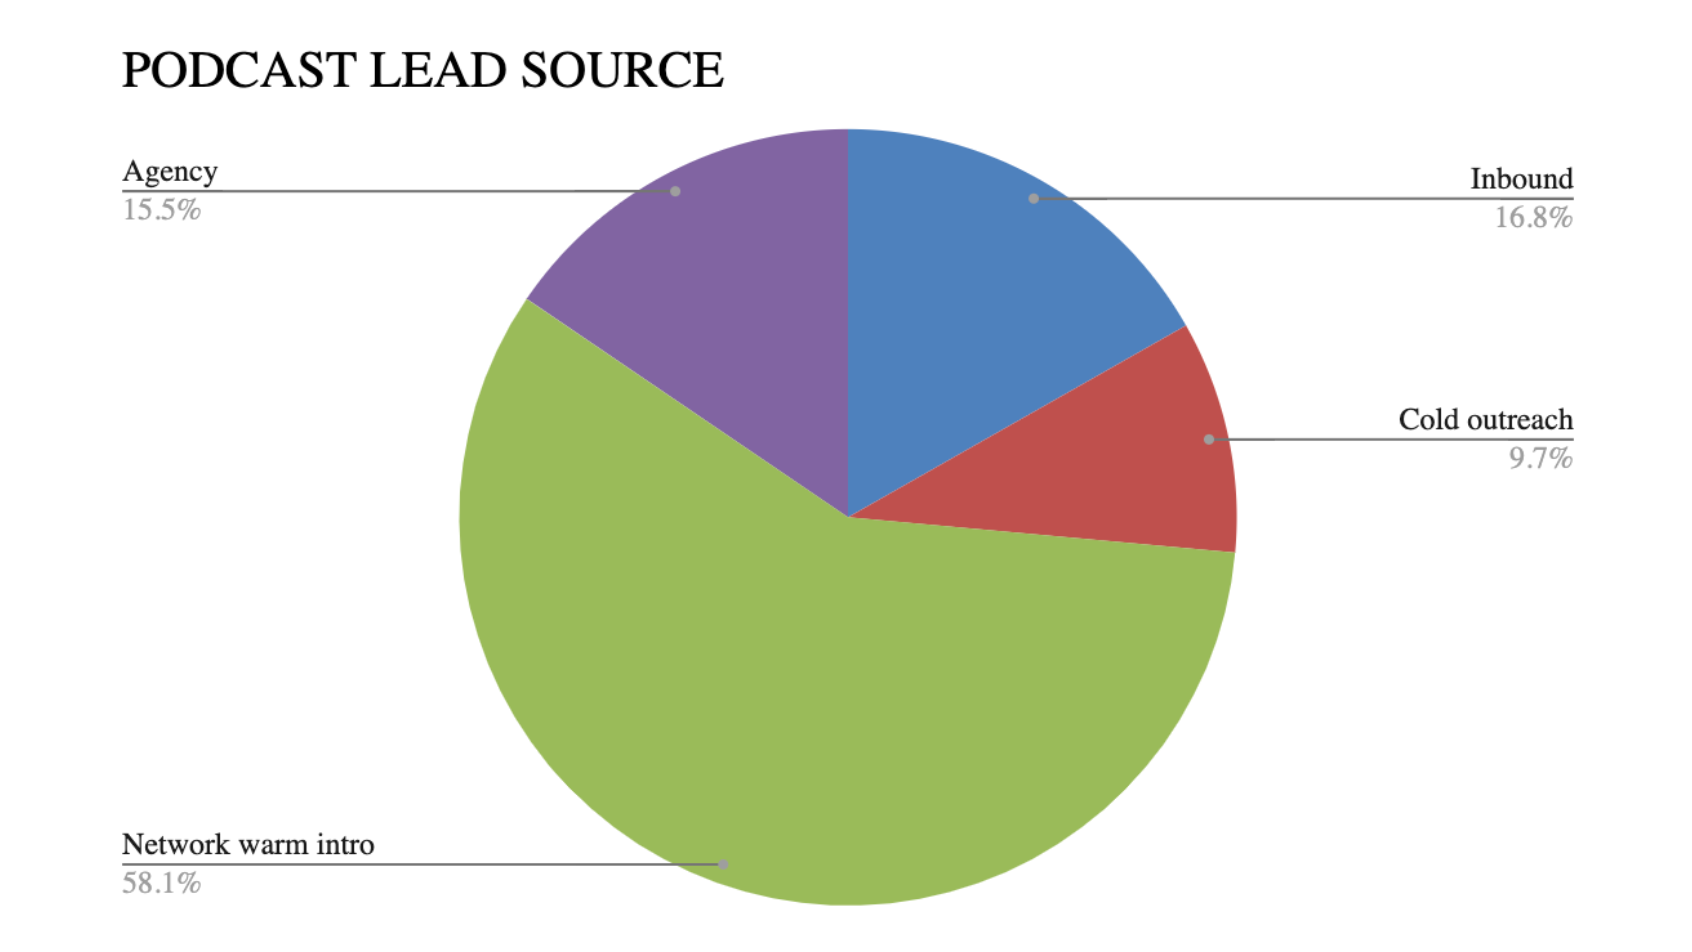 Image showing podcast lead source: 58% Network intro, 15% agency, 16% inbound, 9% cold outreach